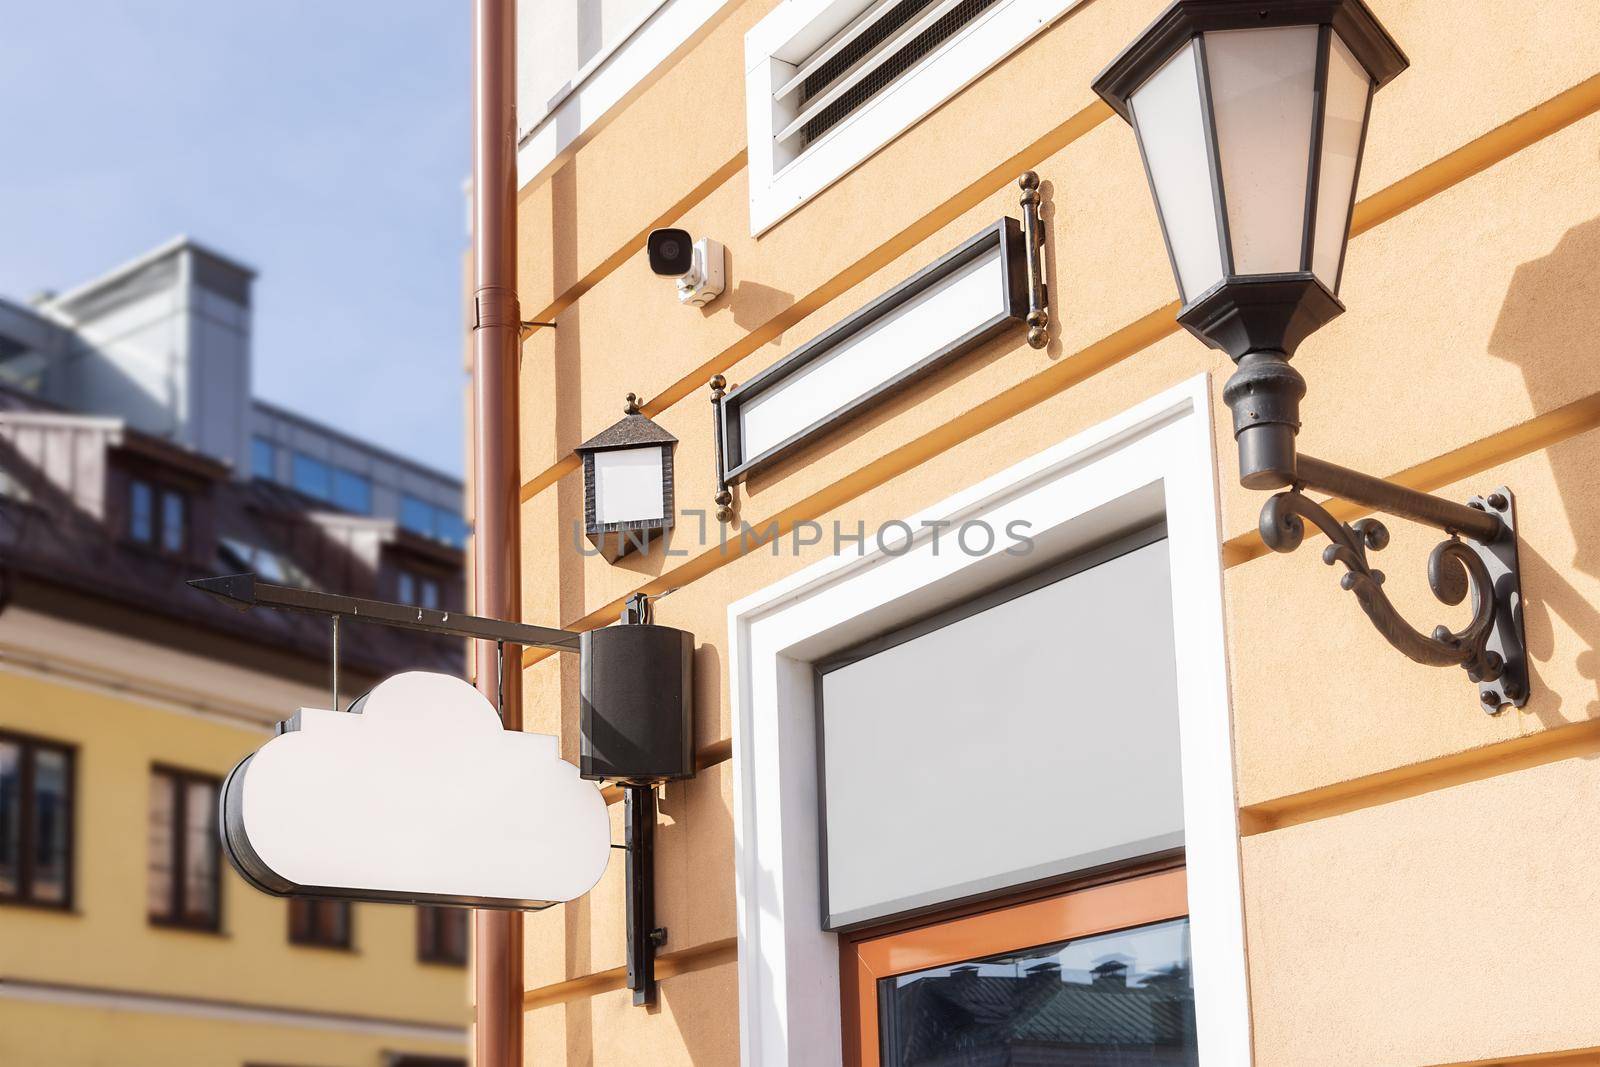 mockup, white signboard, in the form of a cloud, classic style. for a restaurant or cafe on the house, against the backdrop of the old city street. open a sign style to add a sign or company logo